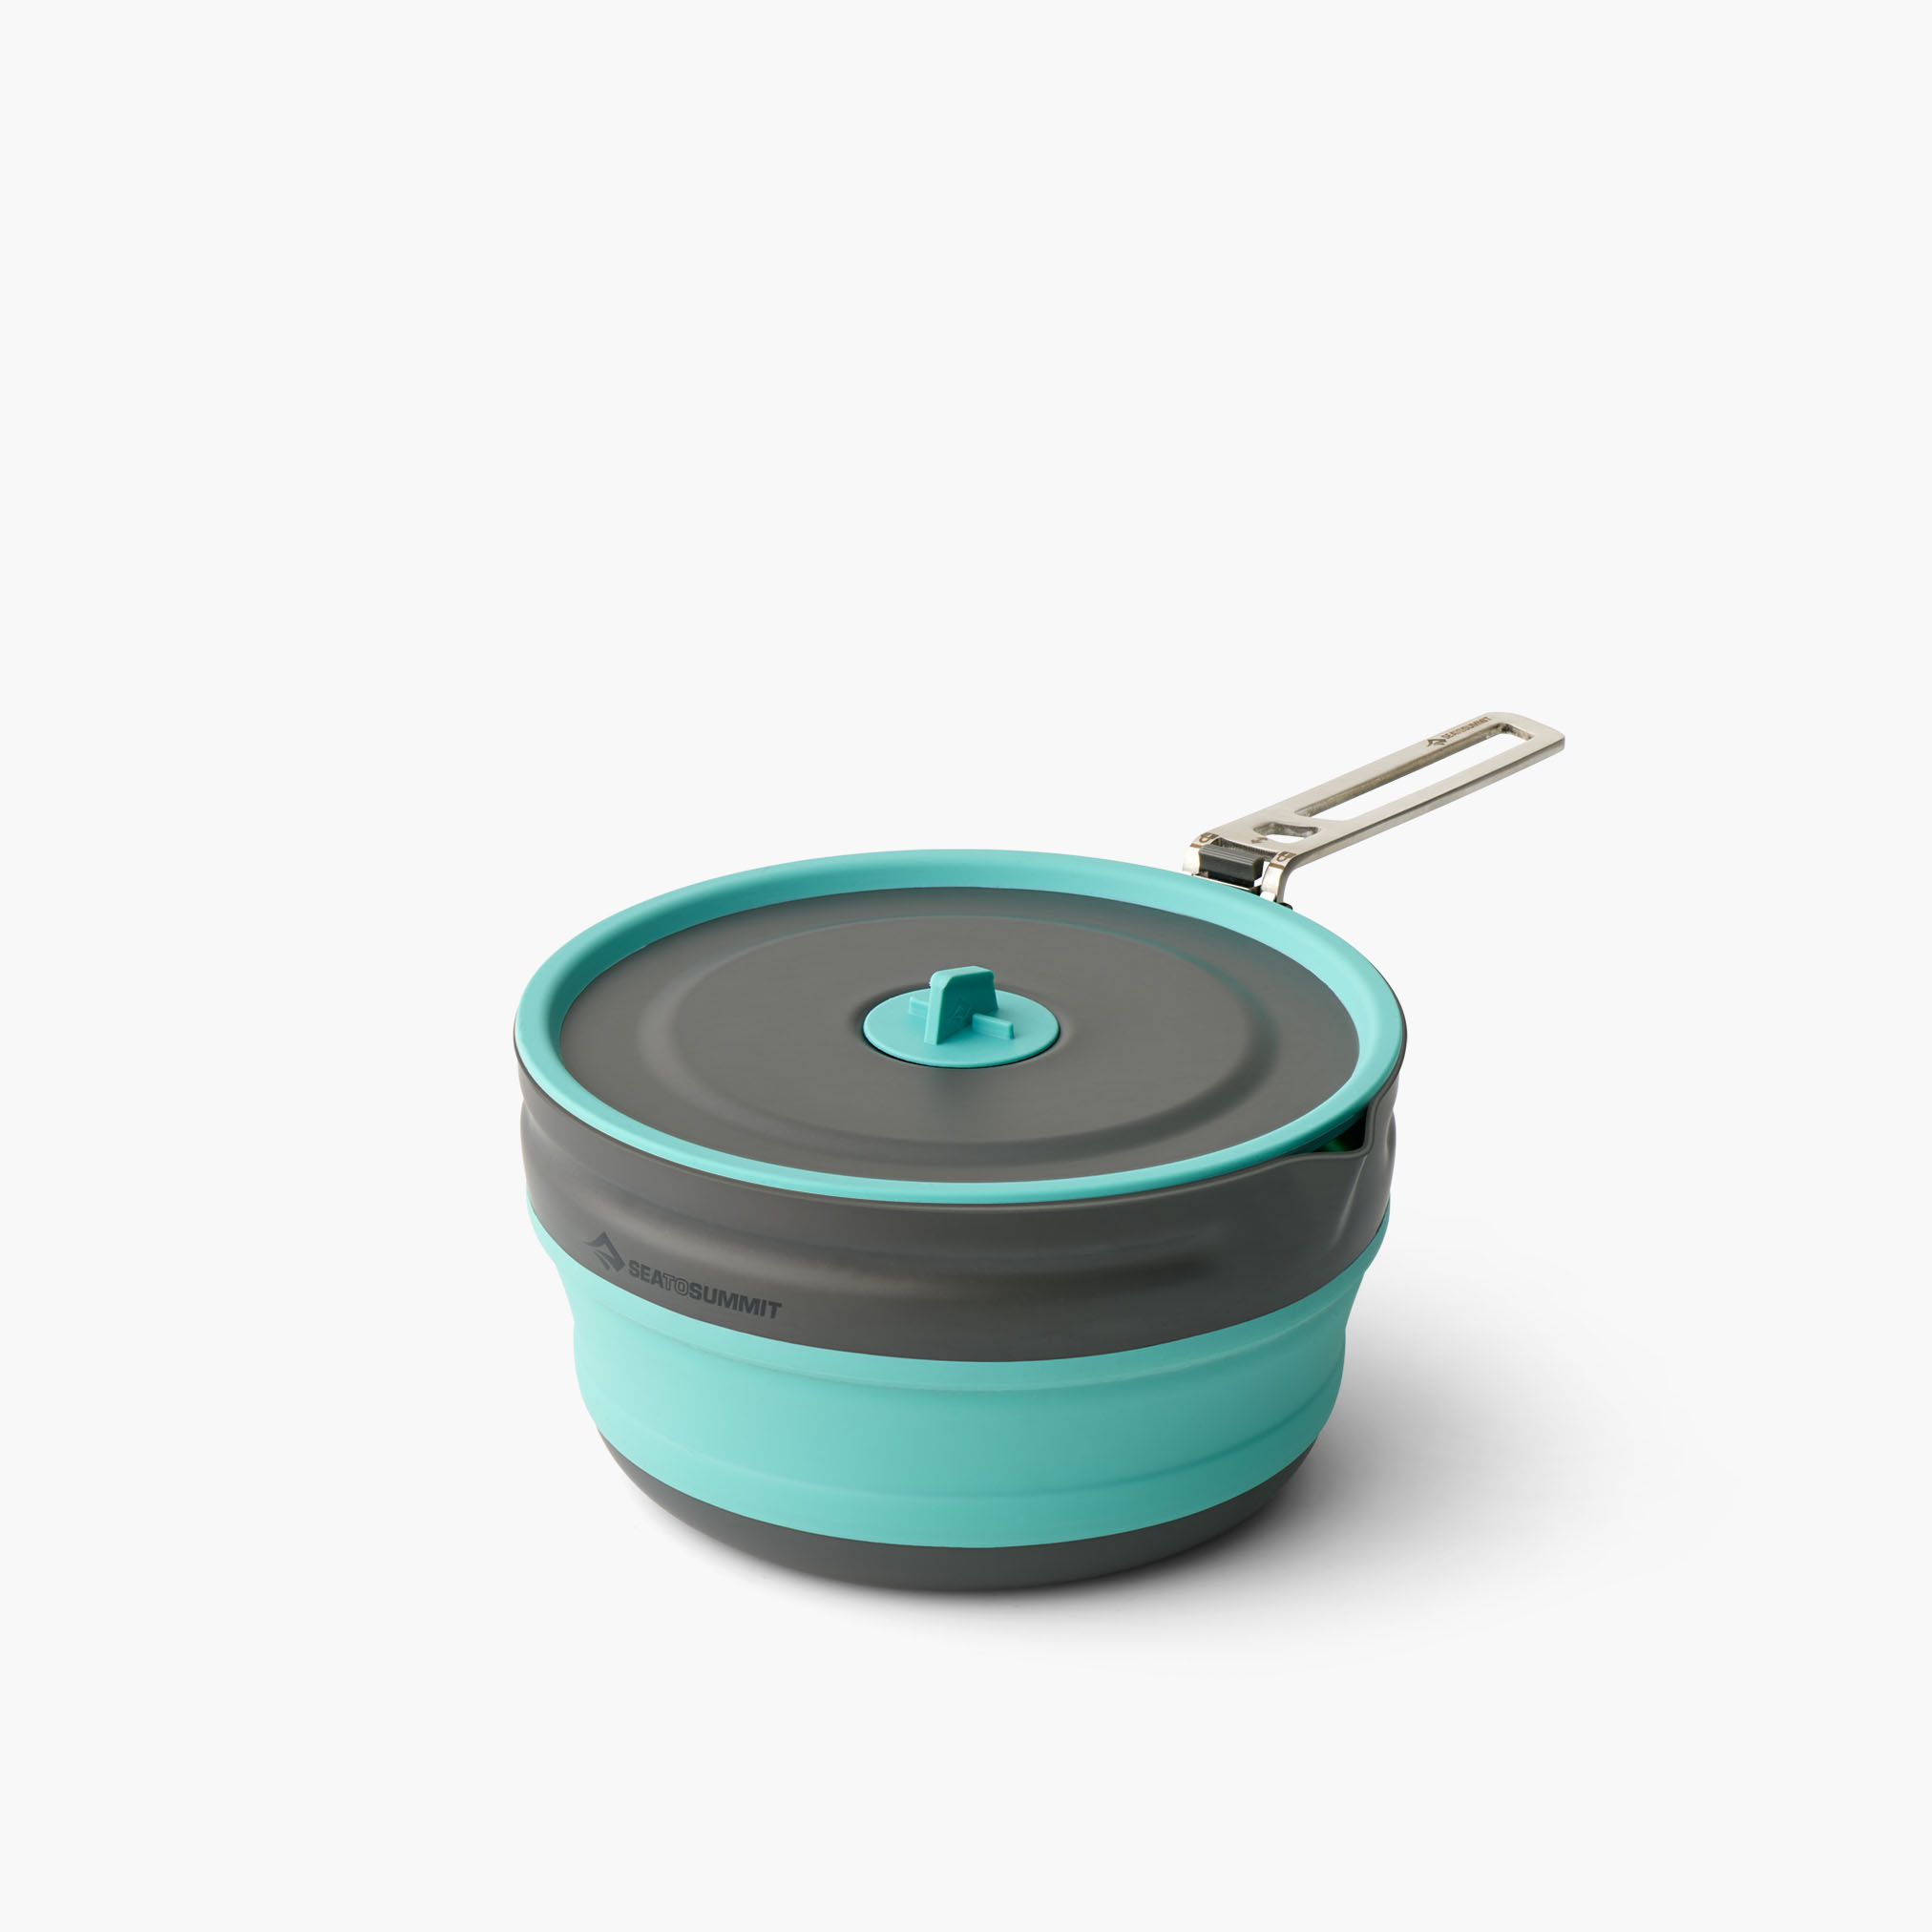 Hrnec Sea to Summit Frontier UL Collapsible Pouring Pot - 2.2 litrů velikost: OS (UNI)